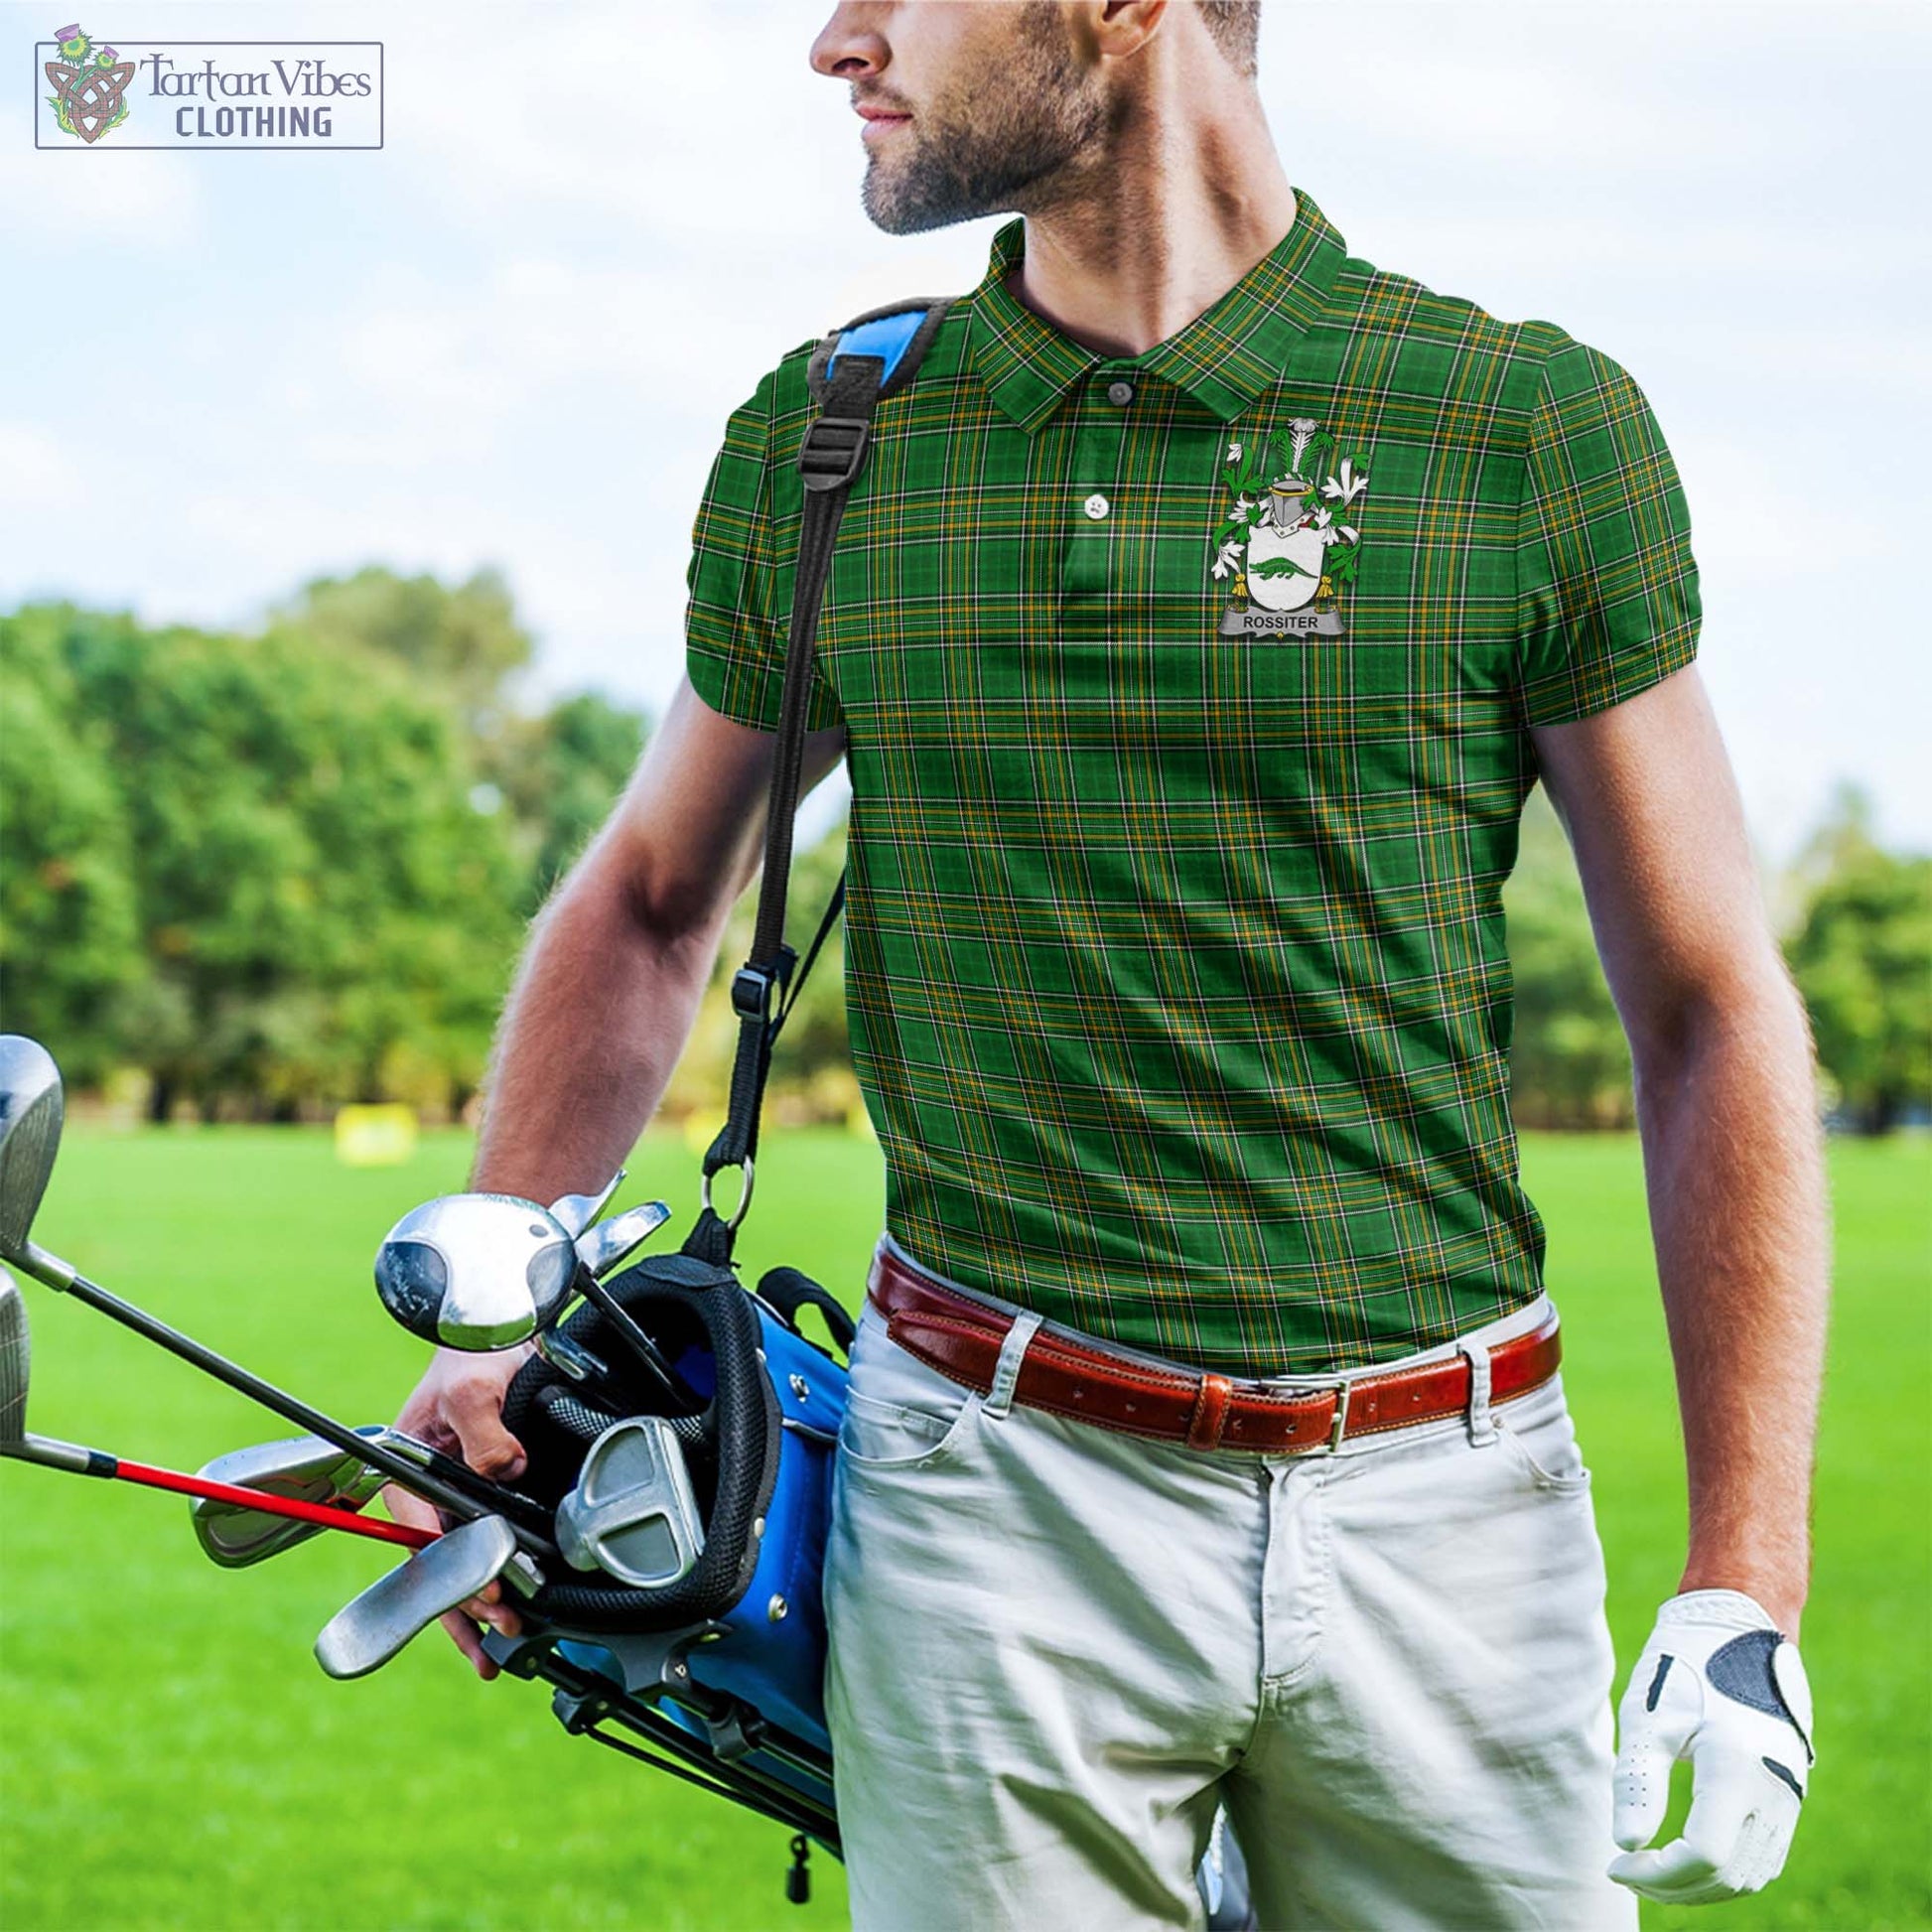 Tartan Vibes Clothing Rossiter Ireland Clan Tartan Polo Shirt with Coat of Arms